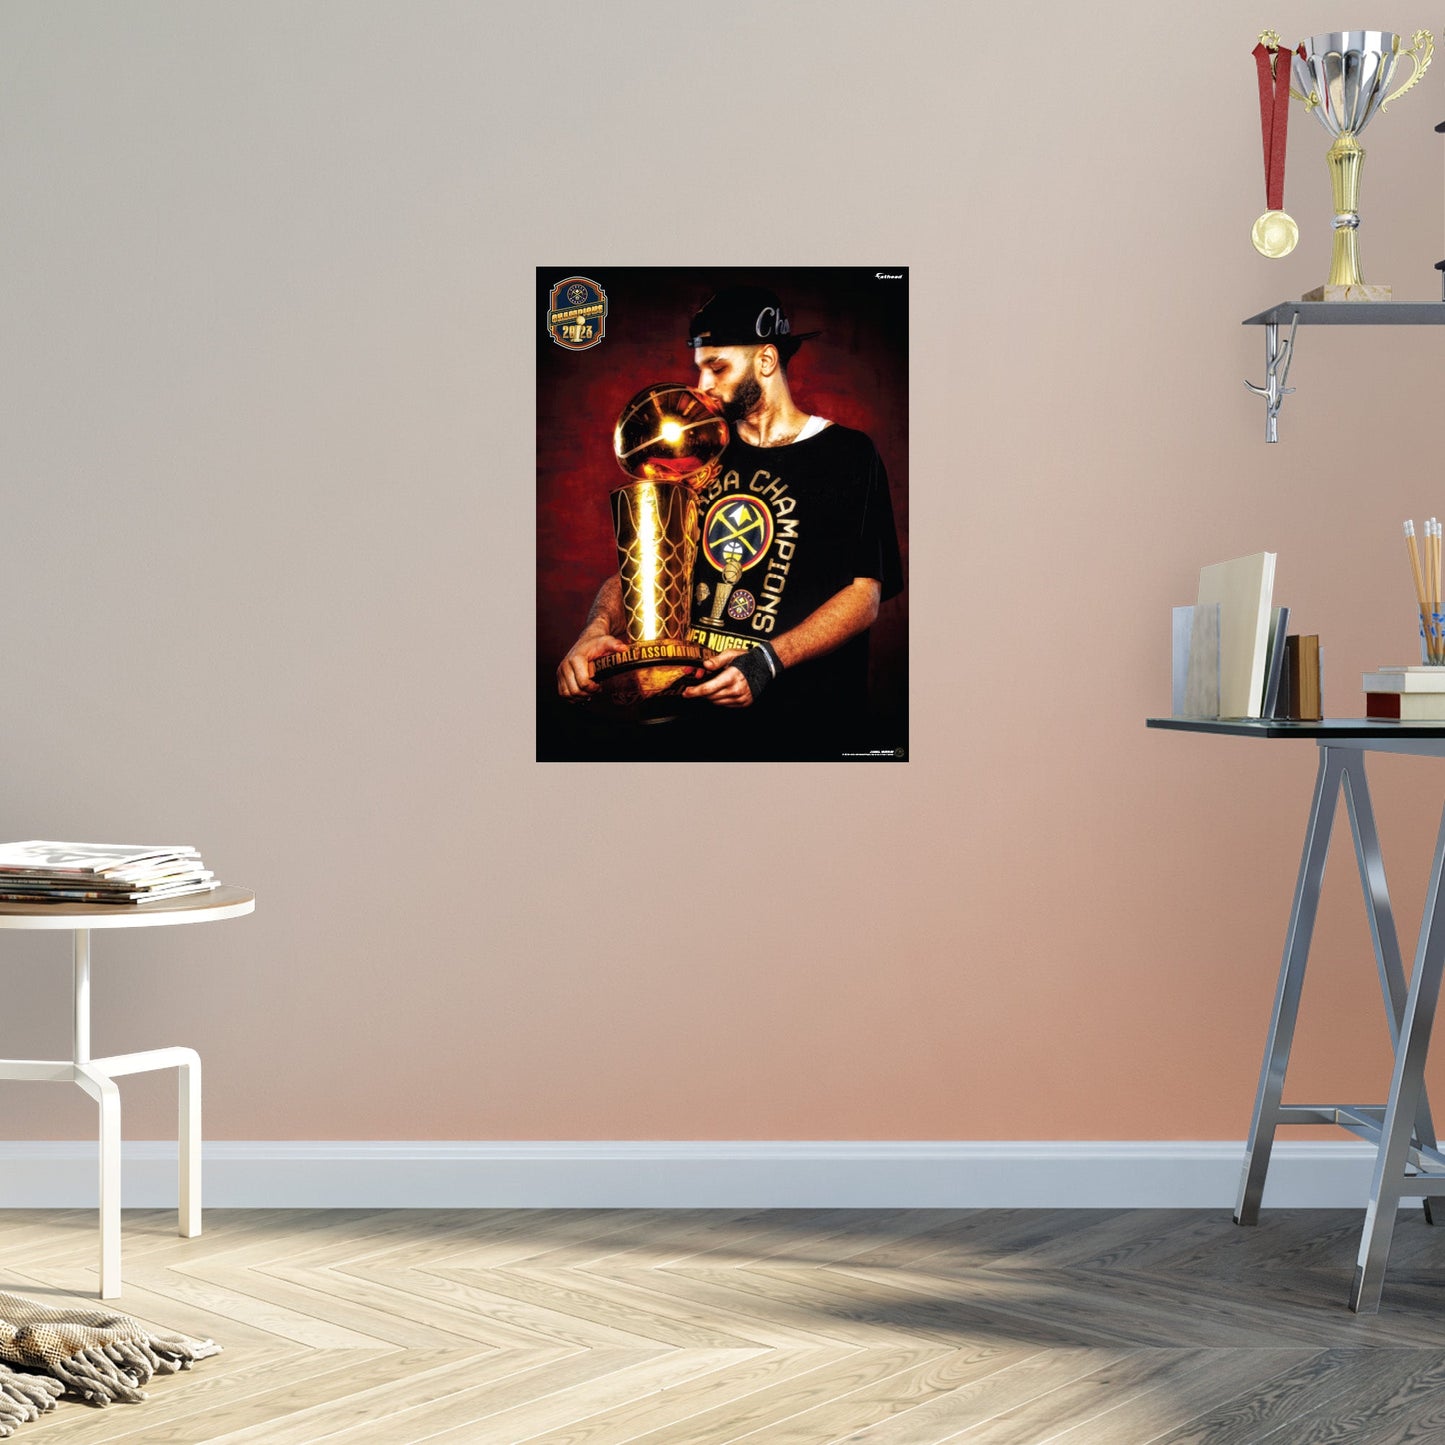 Denver Nuggets: Jamal Murray 2023 Trophy Kiss Poster        - Officially Licensed NBA Removable     Adhesive Decal